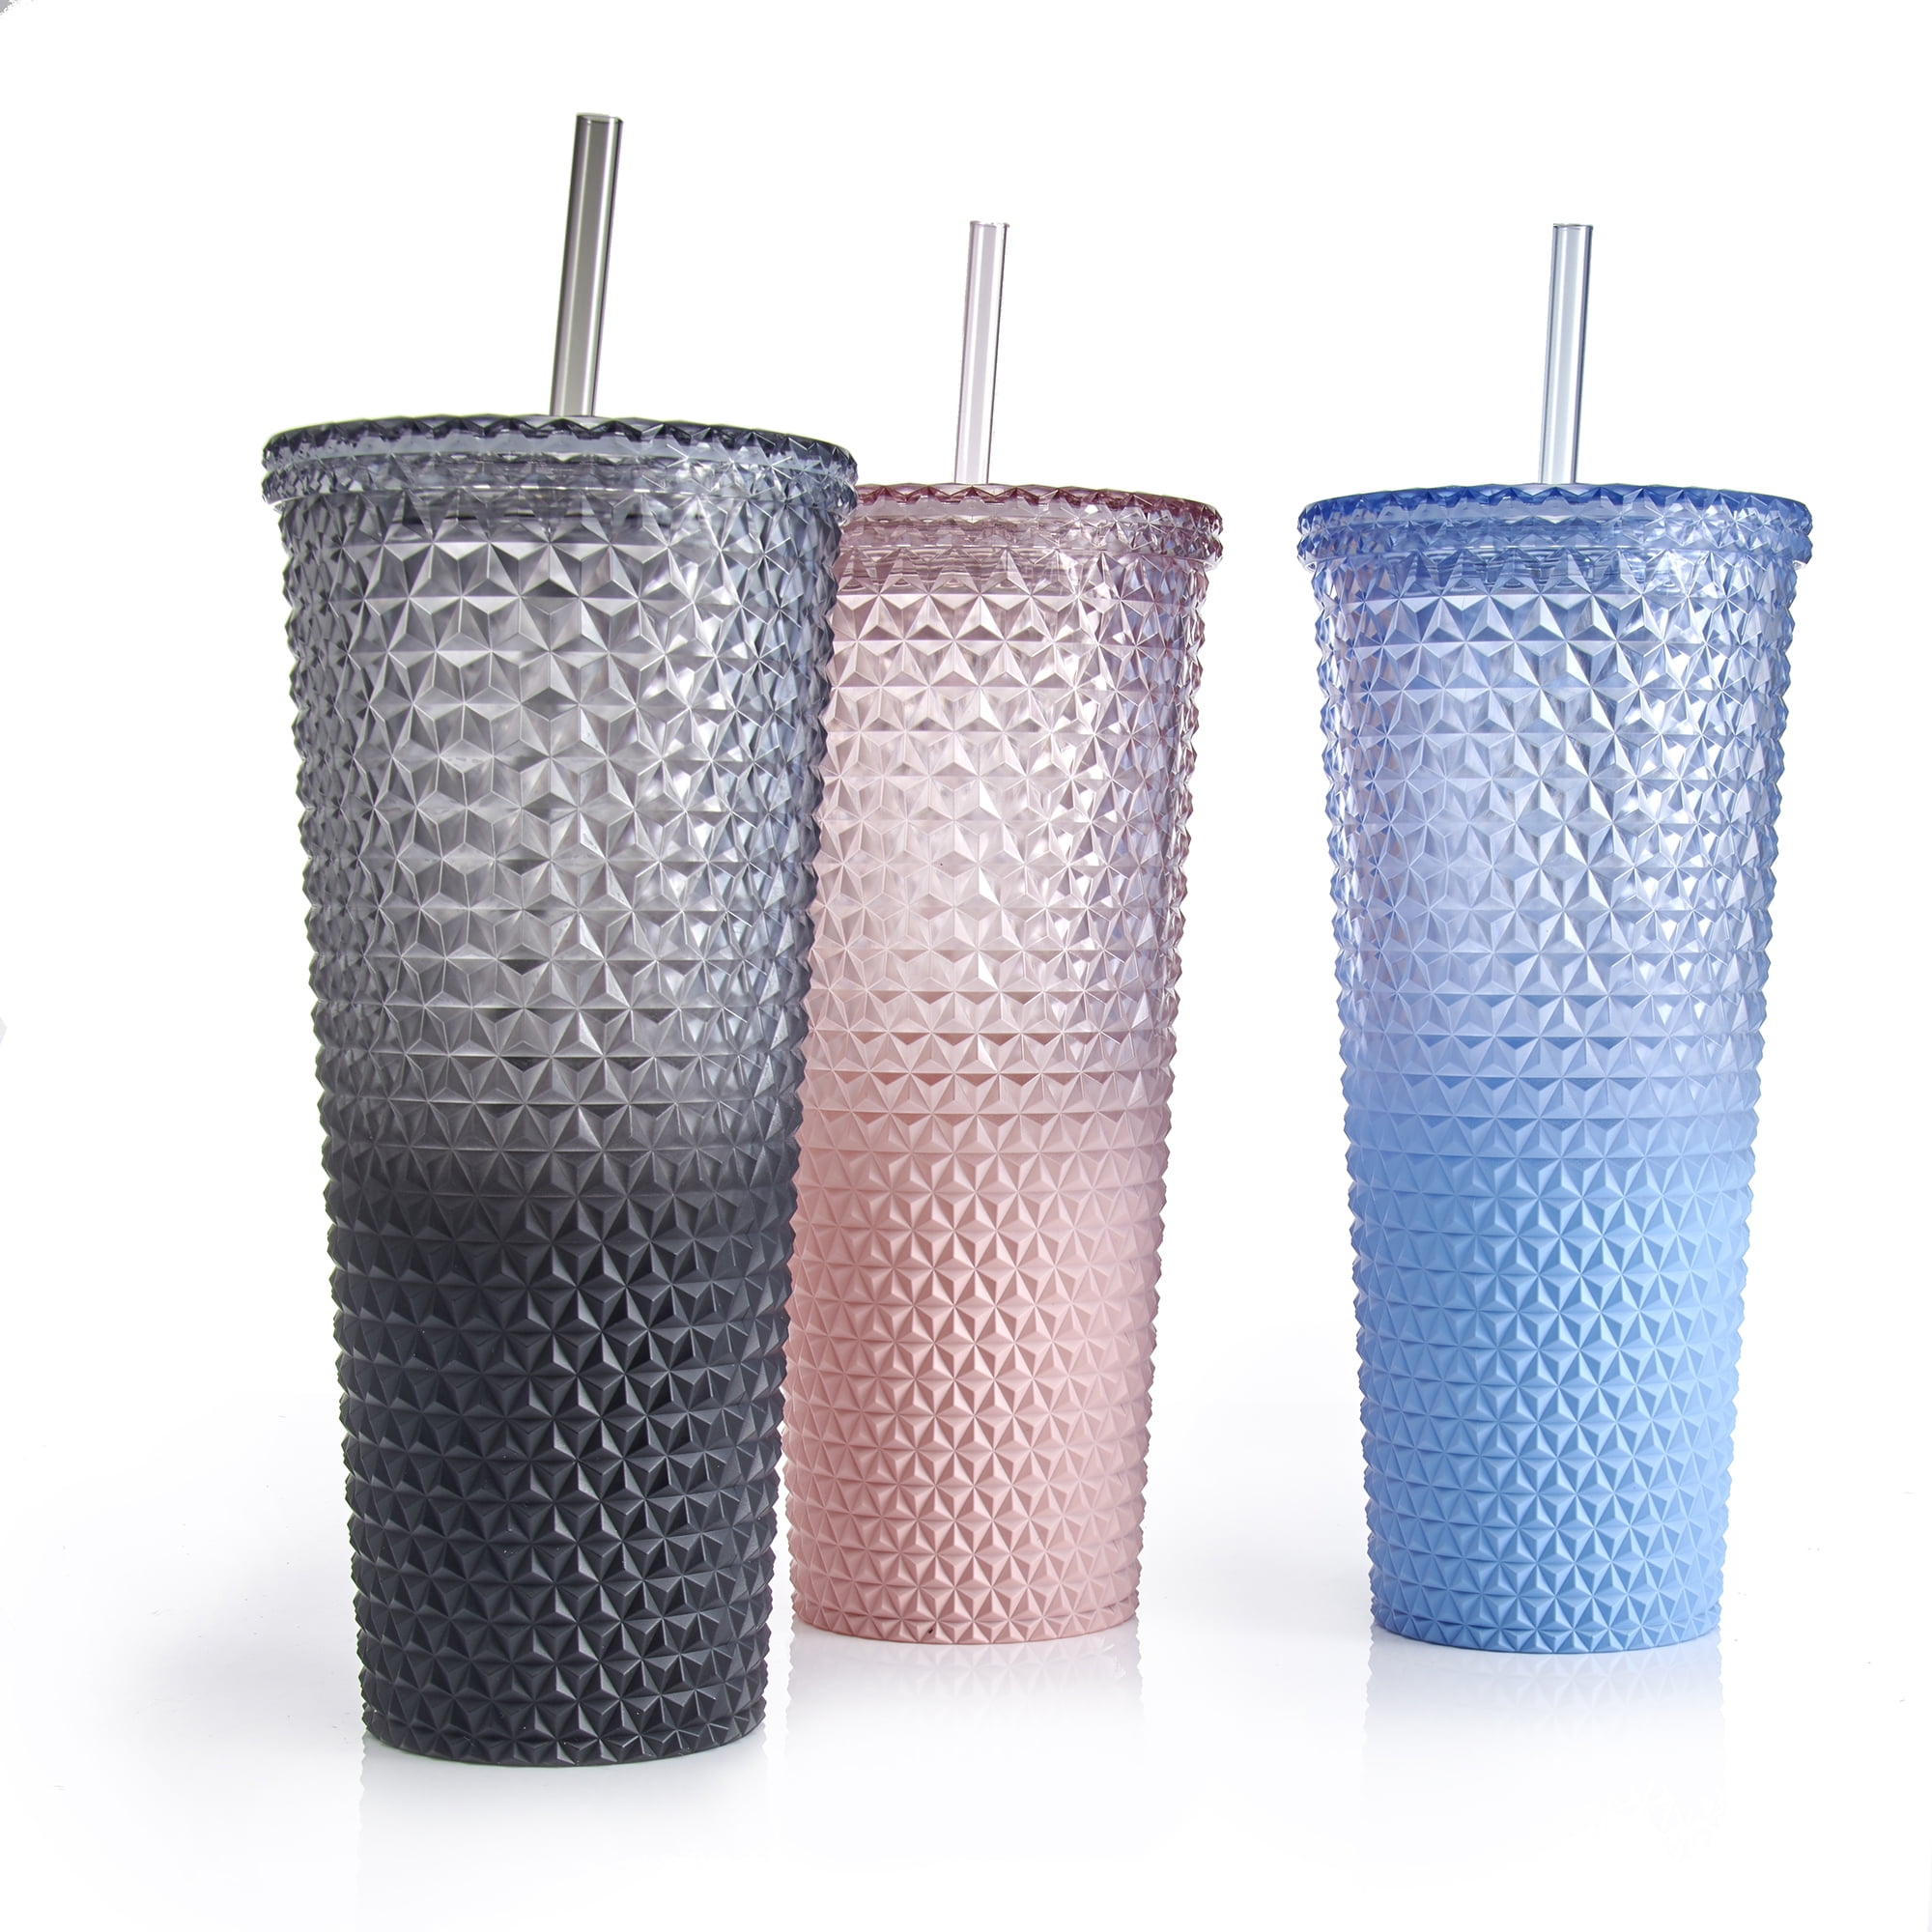 Make Your Brew More Exciting w/ I ♥ H2O Novelty Tumbler – Foxx